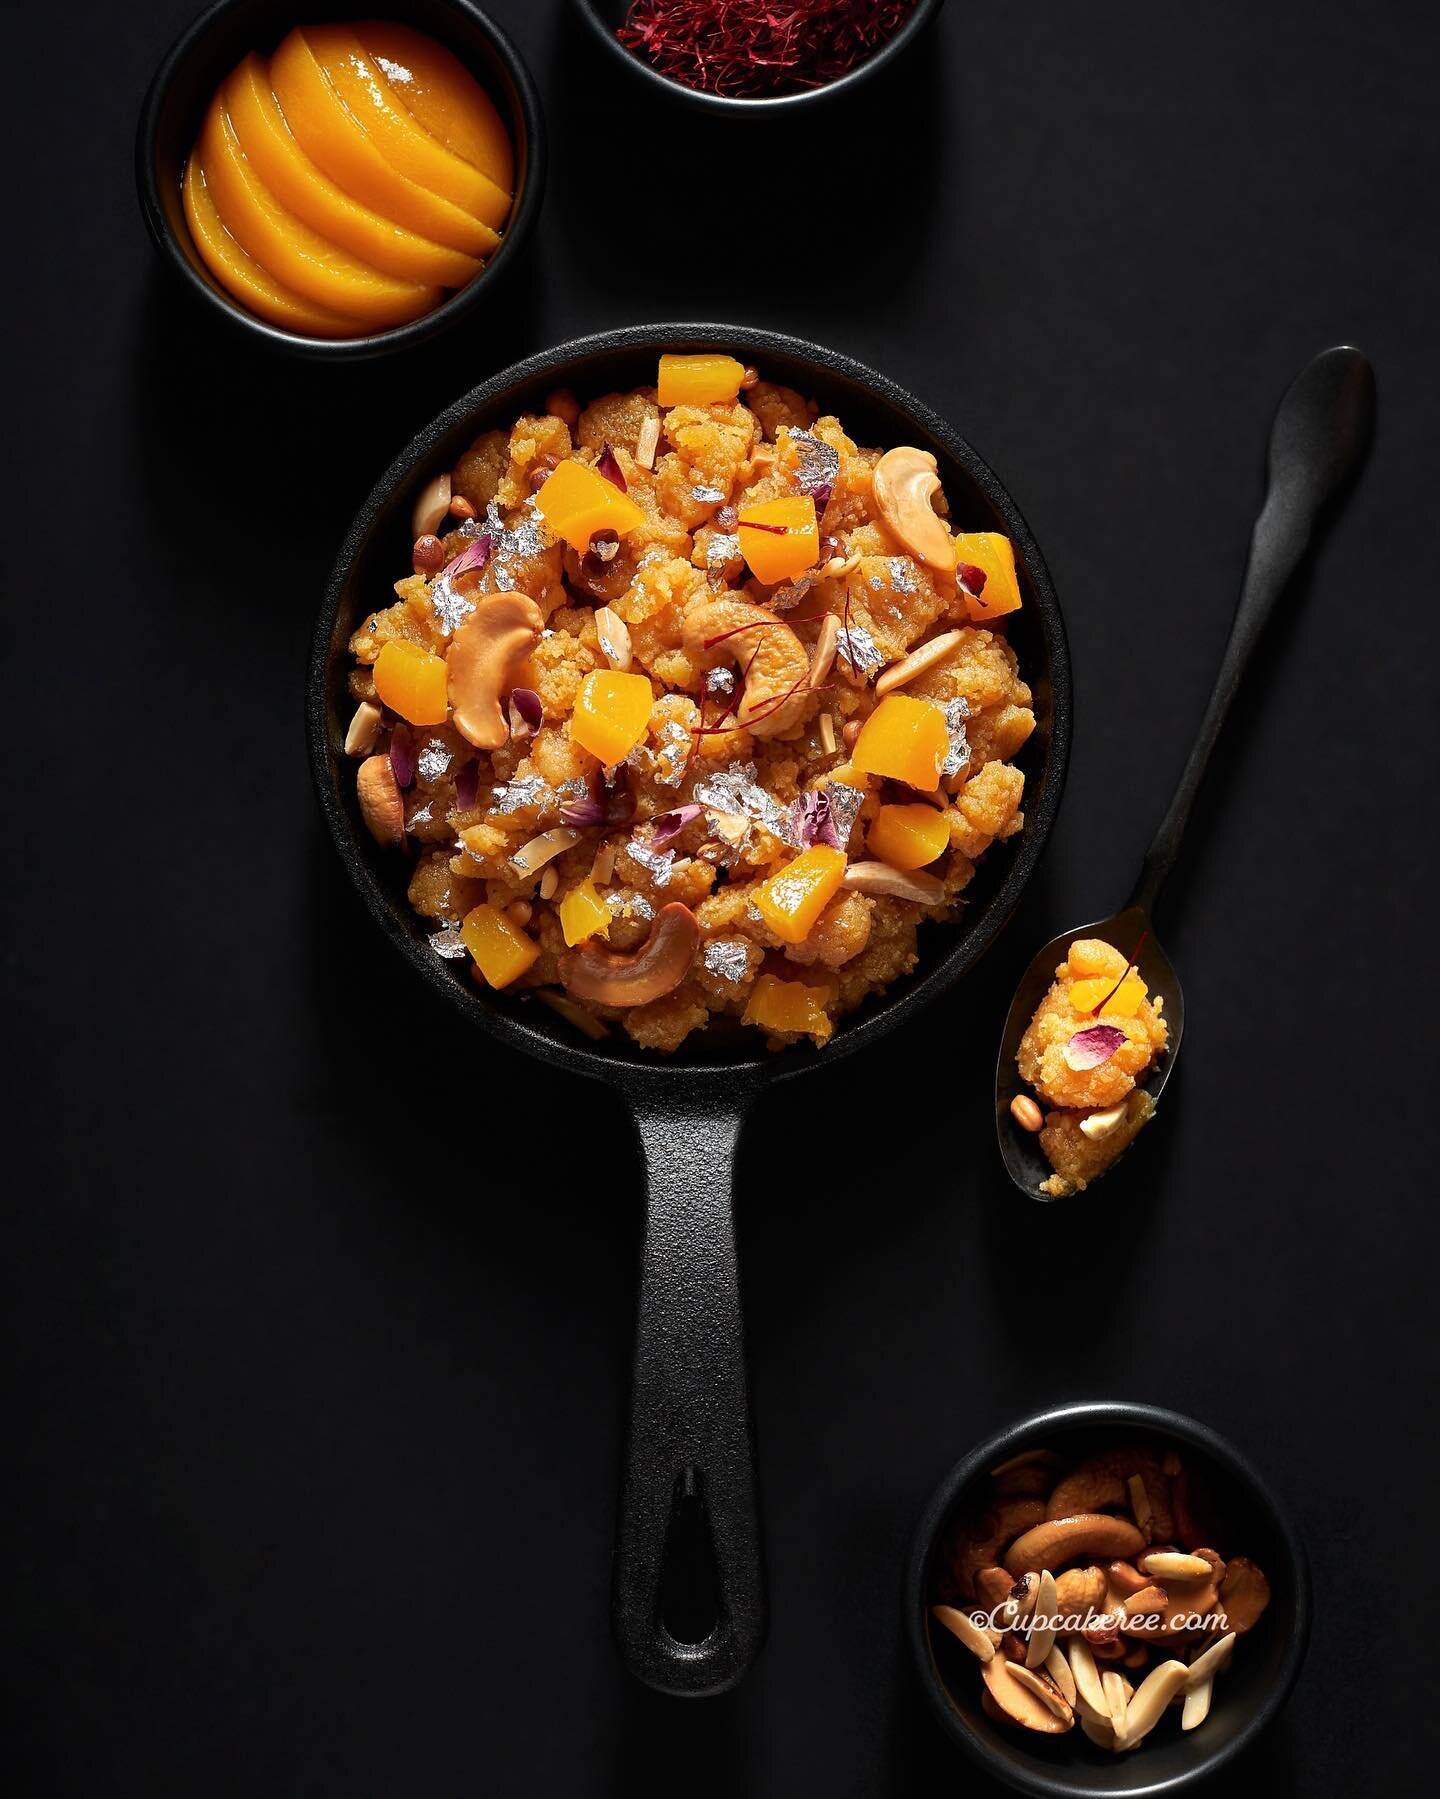 This ALMOND AND PEACH HALWA is made with blanched almonds, milk and sugar. I also added some chopped peaches for a fruity twist. The stone fruit adds a touch of tartness that contrasts well with the richness of the ghee and almonds. The halwa does re